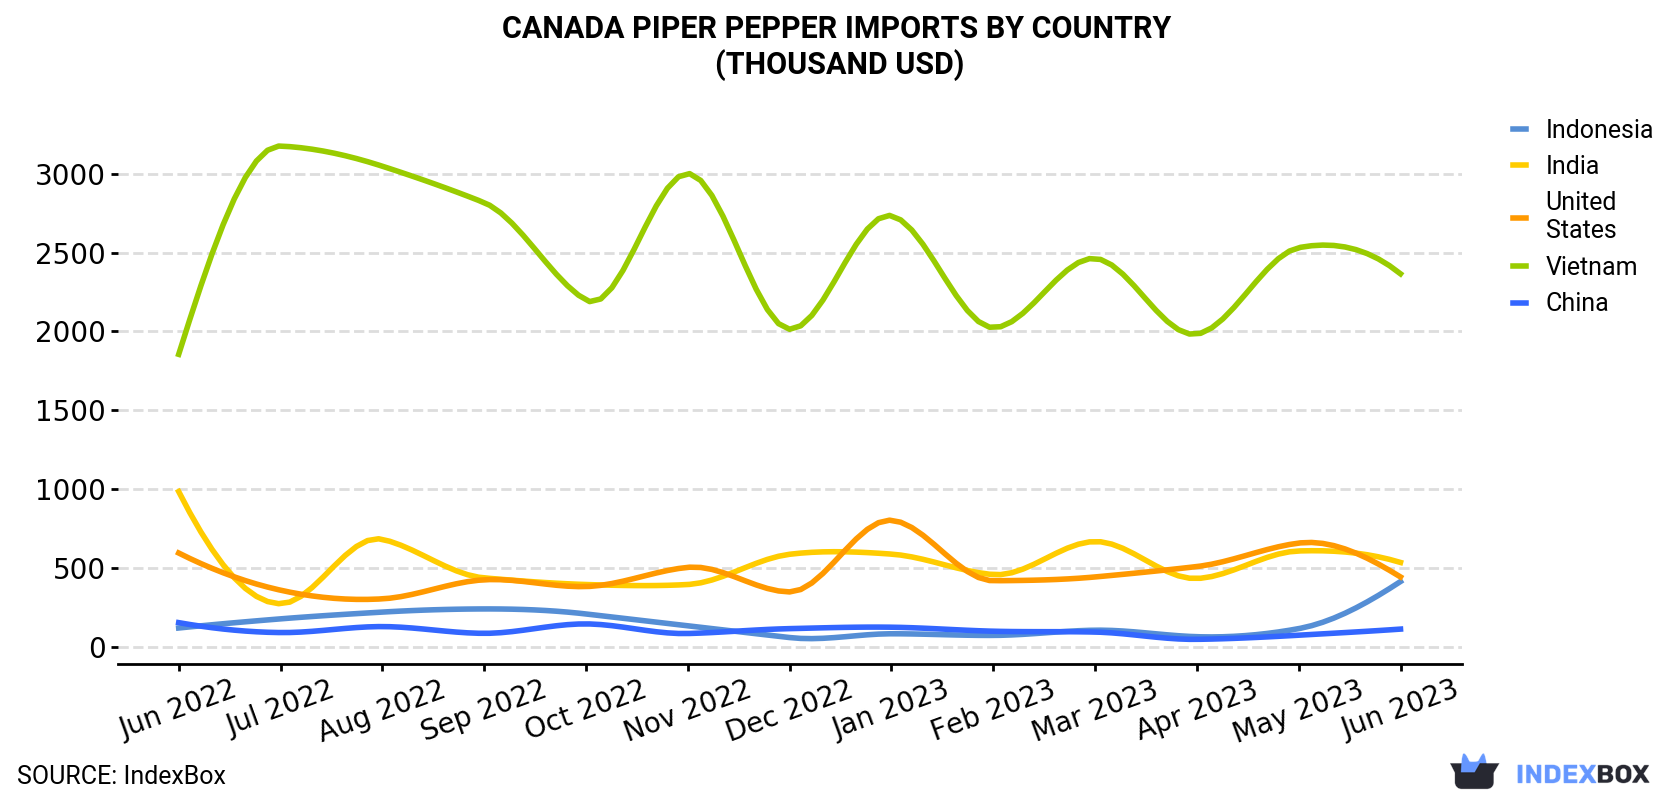 Canada Piper Pepper Imports By Country (Thousand USD)